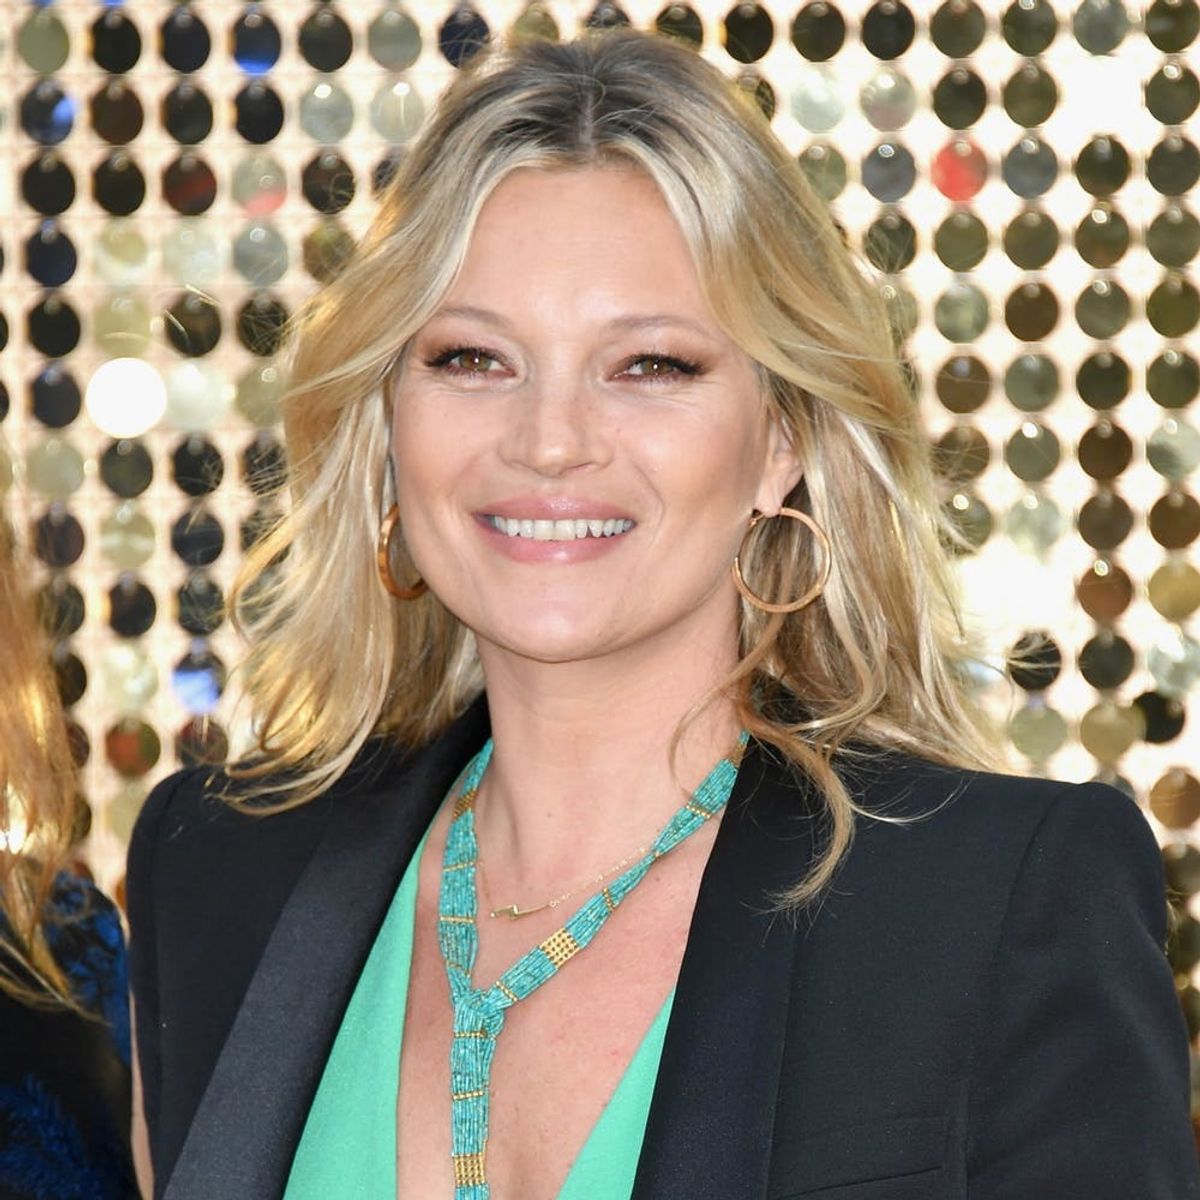 Whoa: Is Kate Moss Engaged…AND Married?